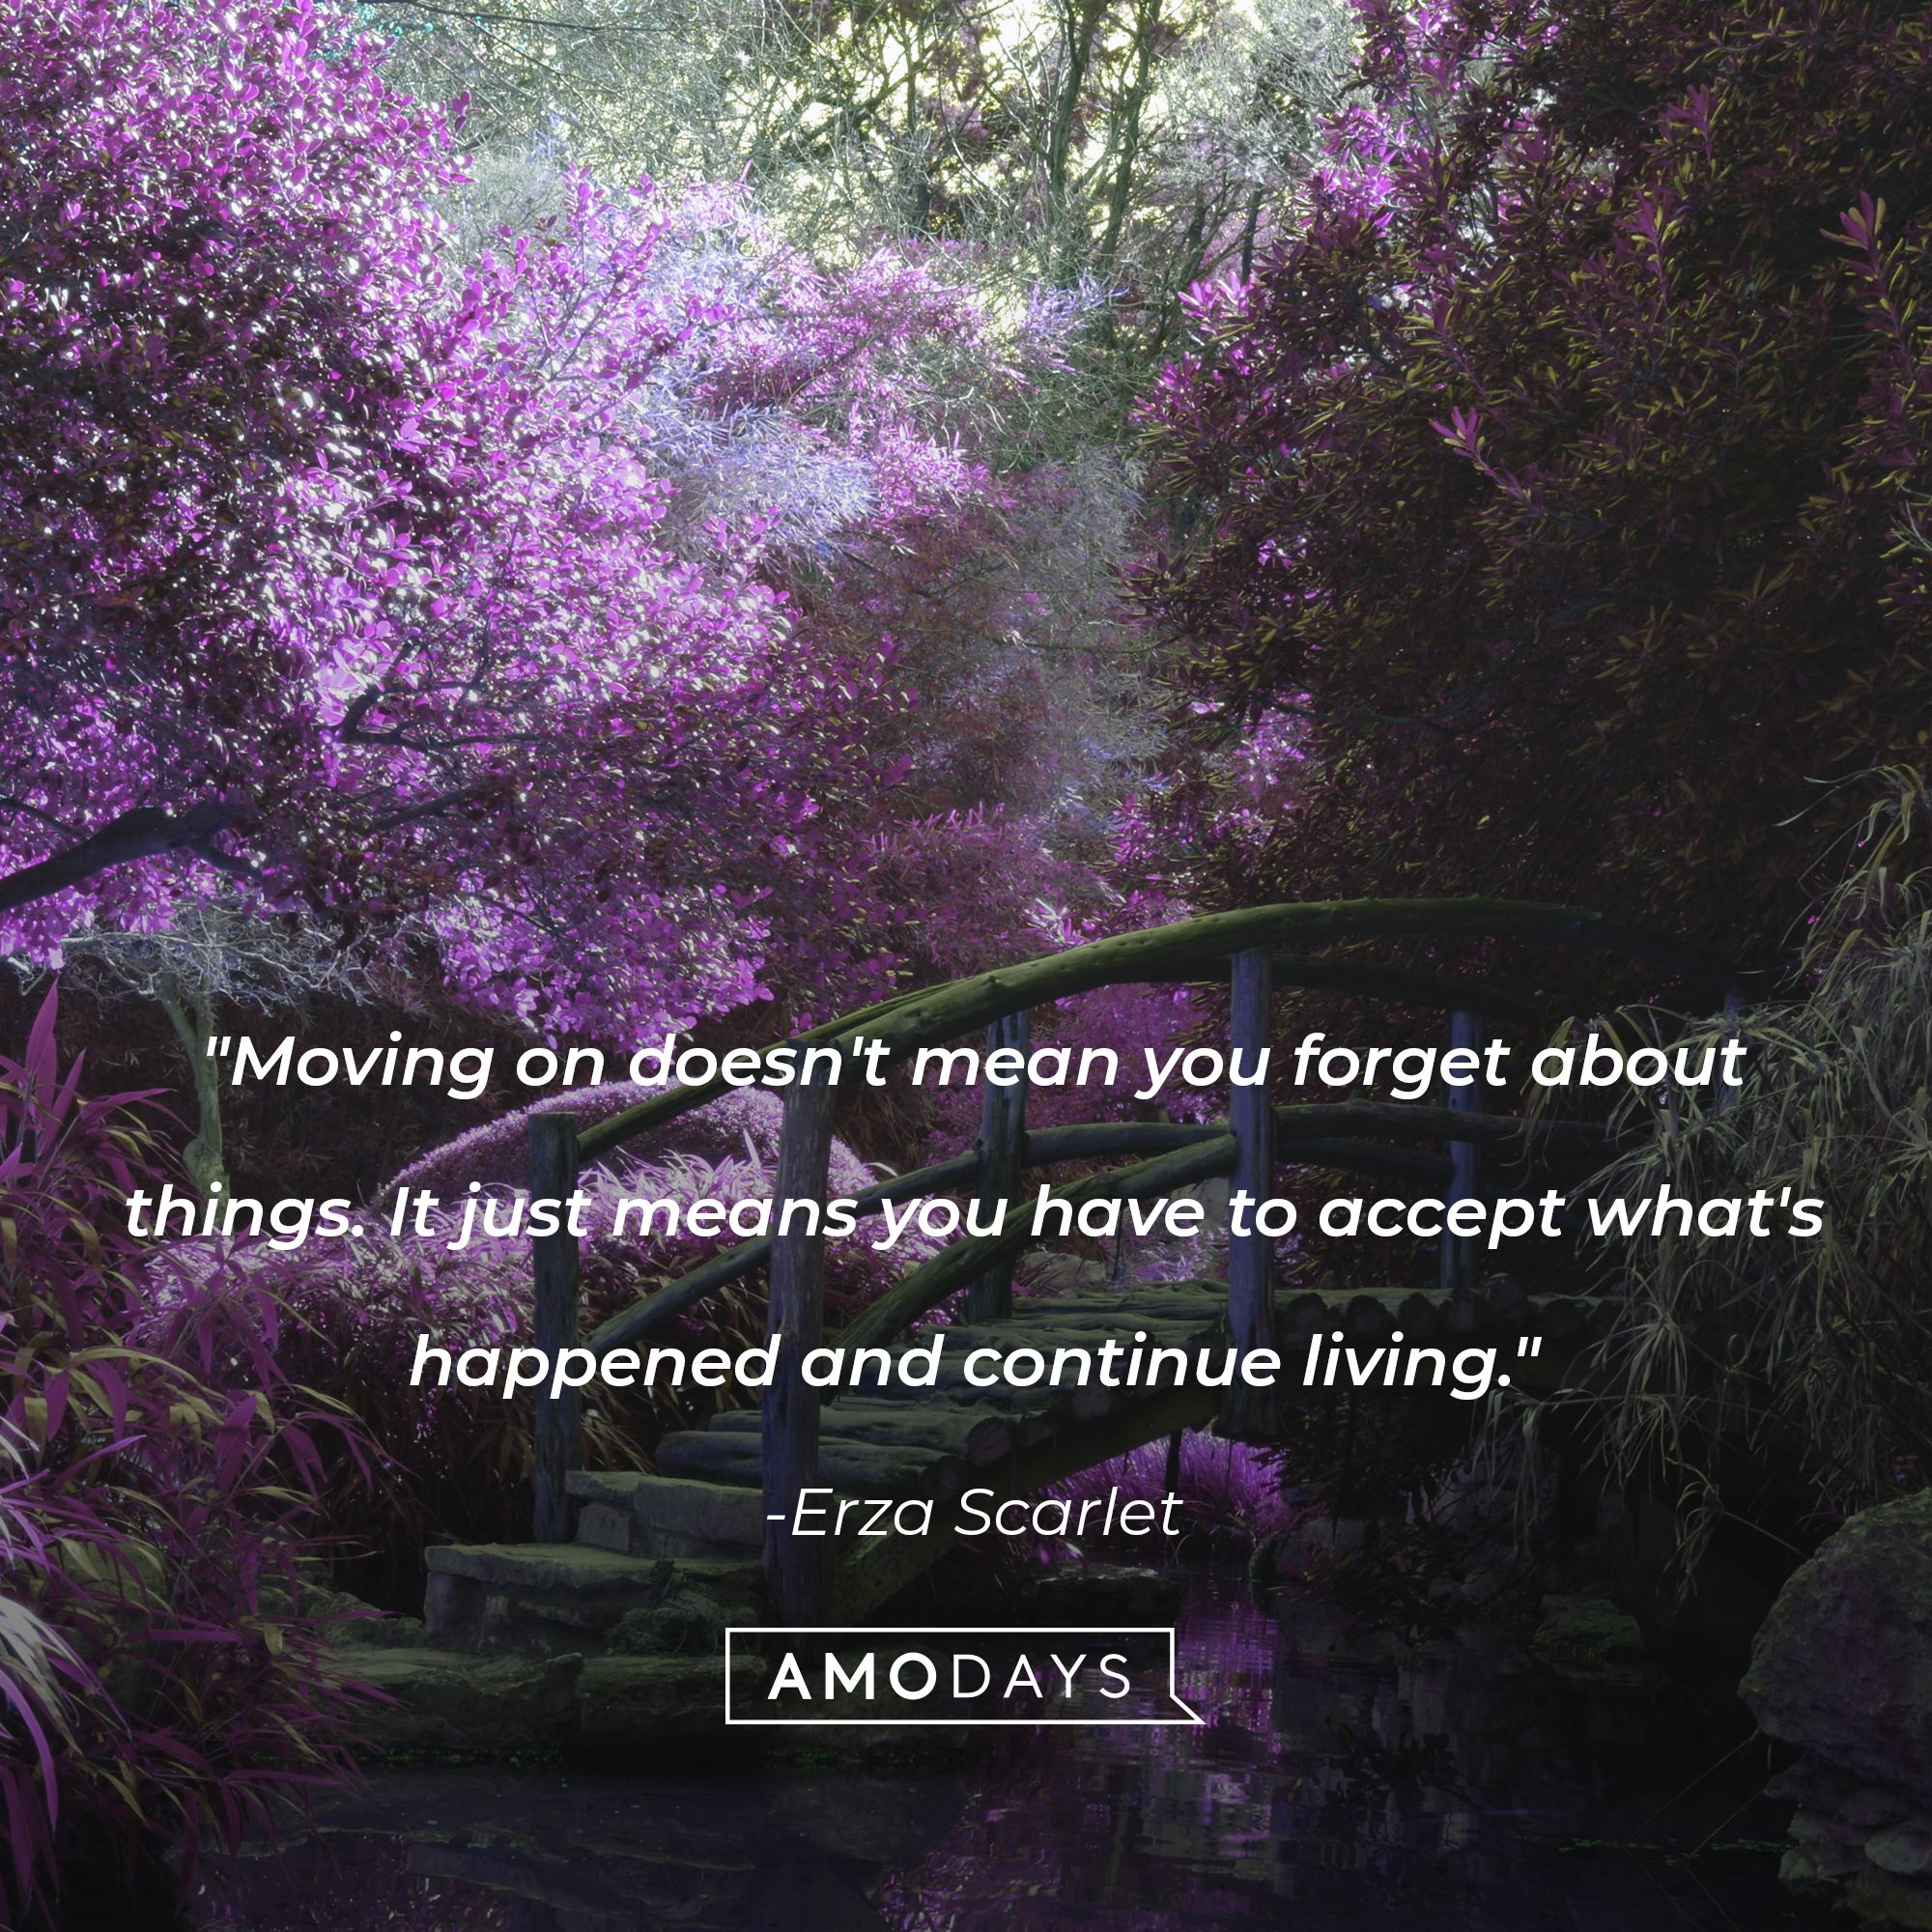 Erza Scarlet's quote: "Moving on doesn't mean you forget about things. It just means you have to accept what's happened and continue living." | Image: Unsplash